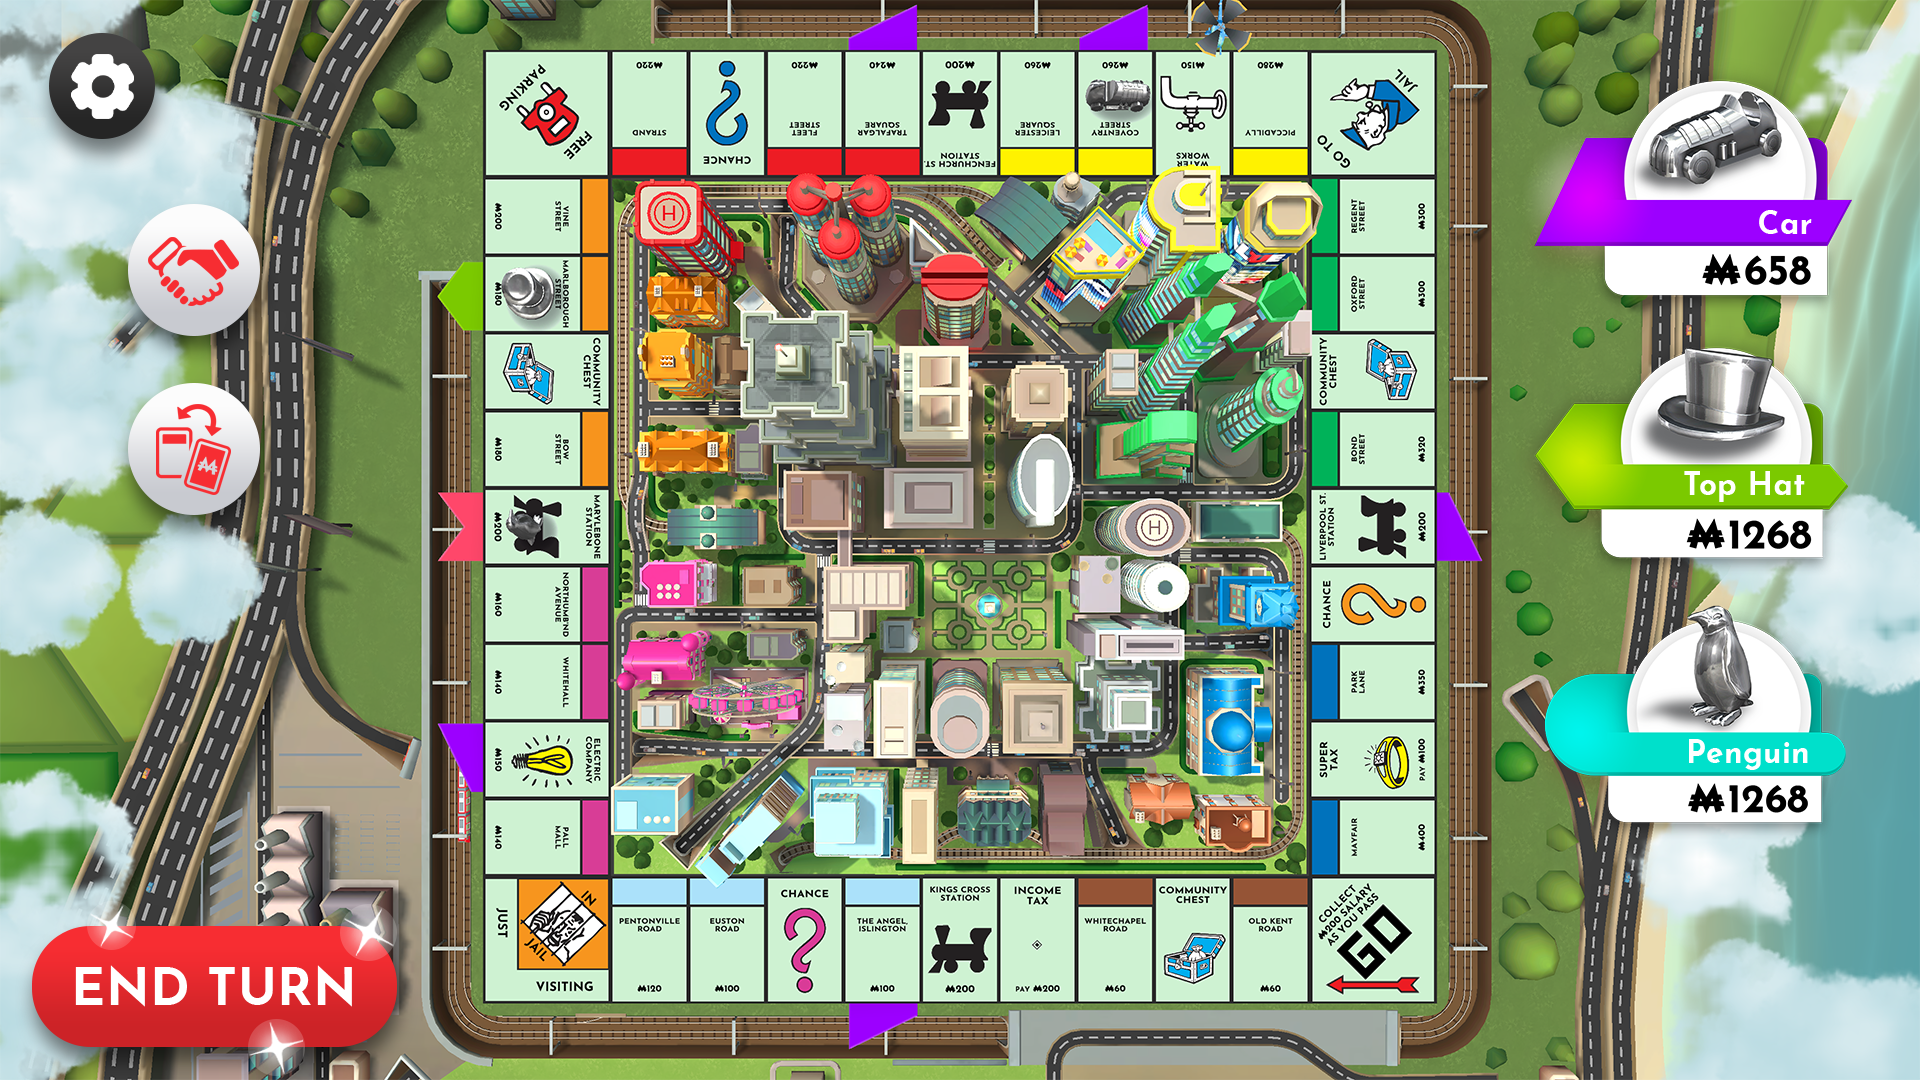 Download & Play MONOPOLY - Classic Board Game on PC & Mac (Emulator).